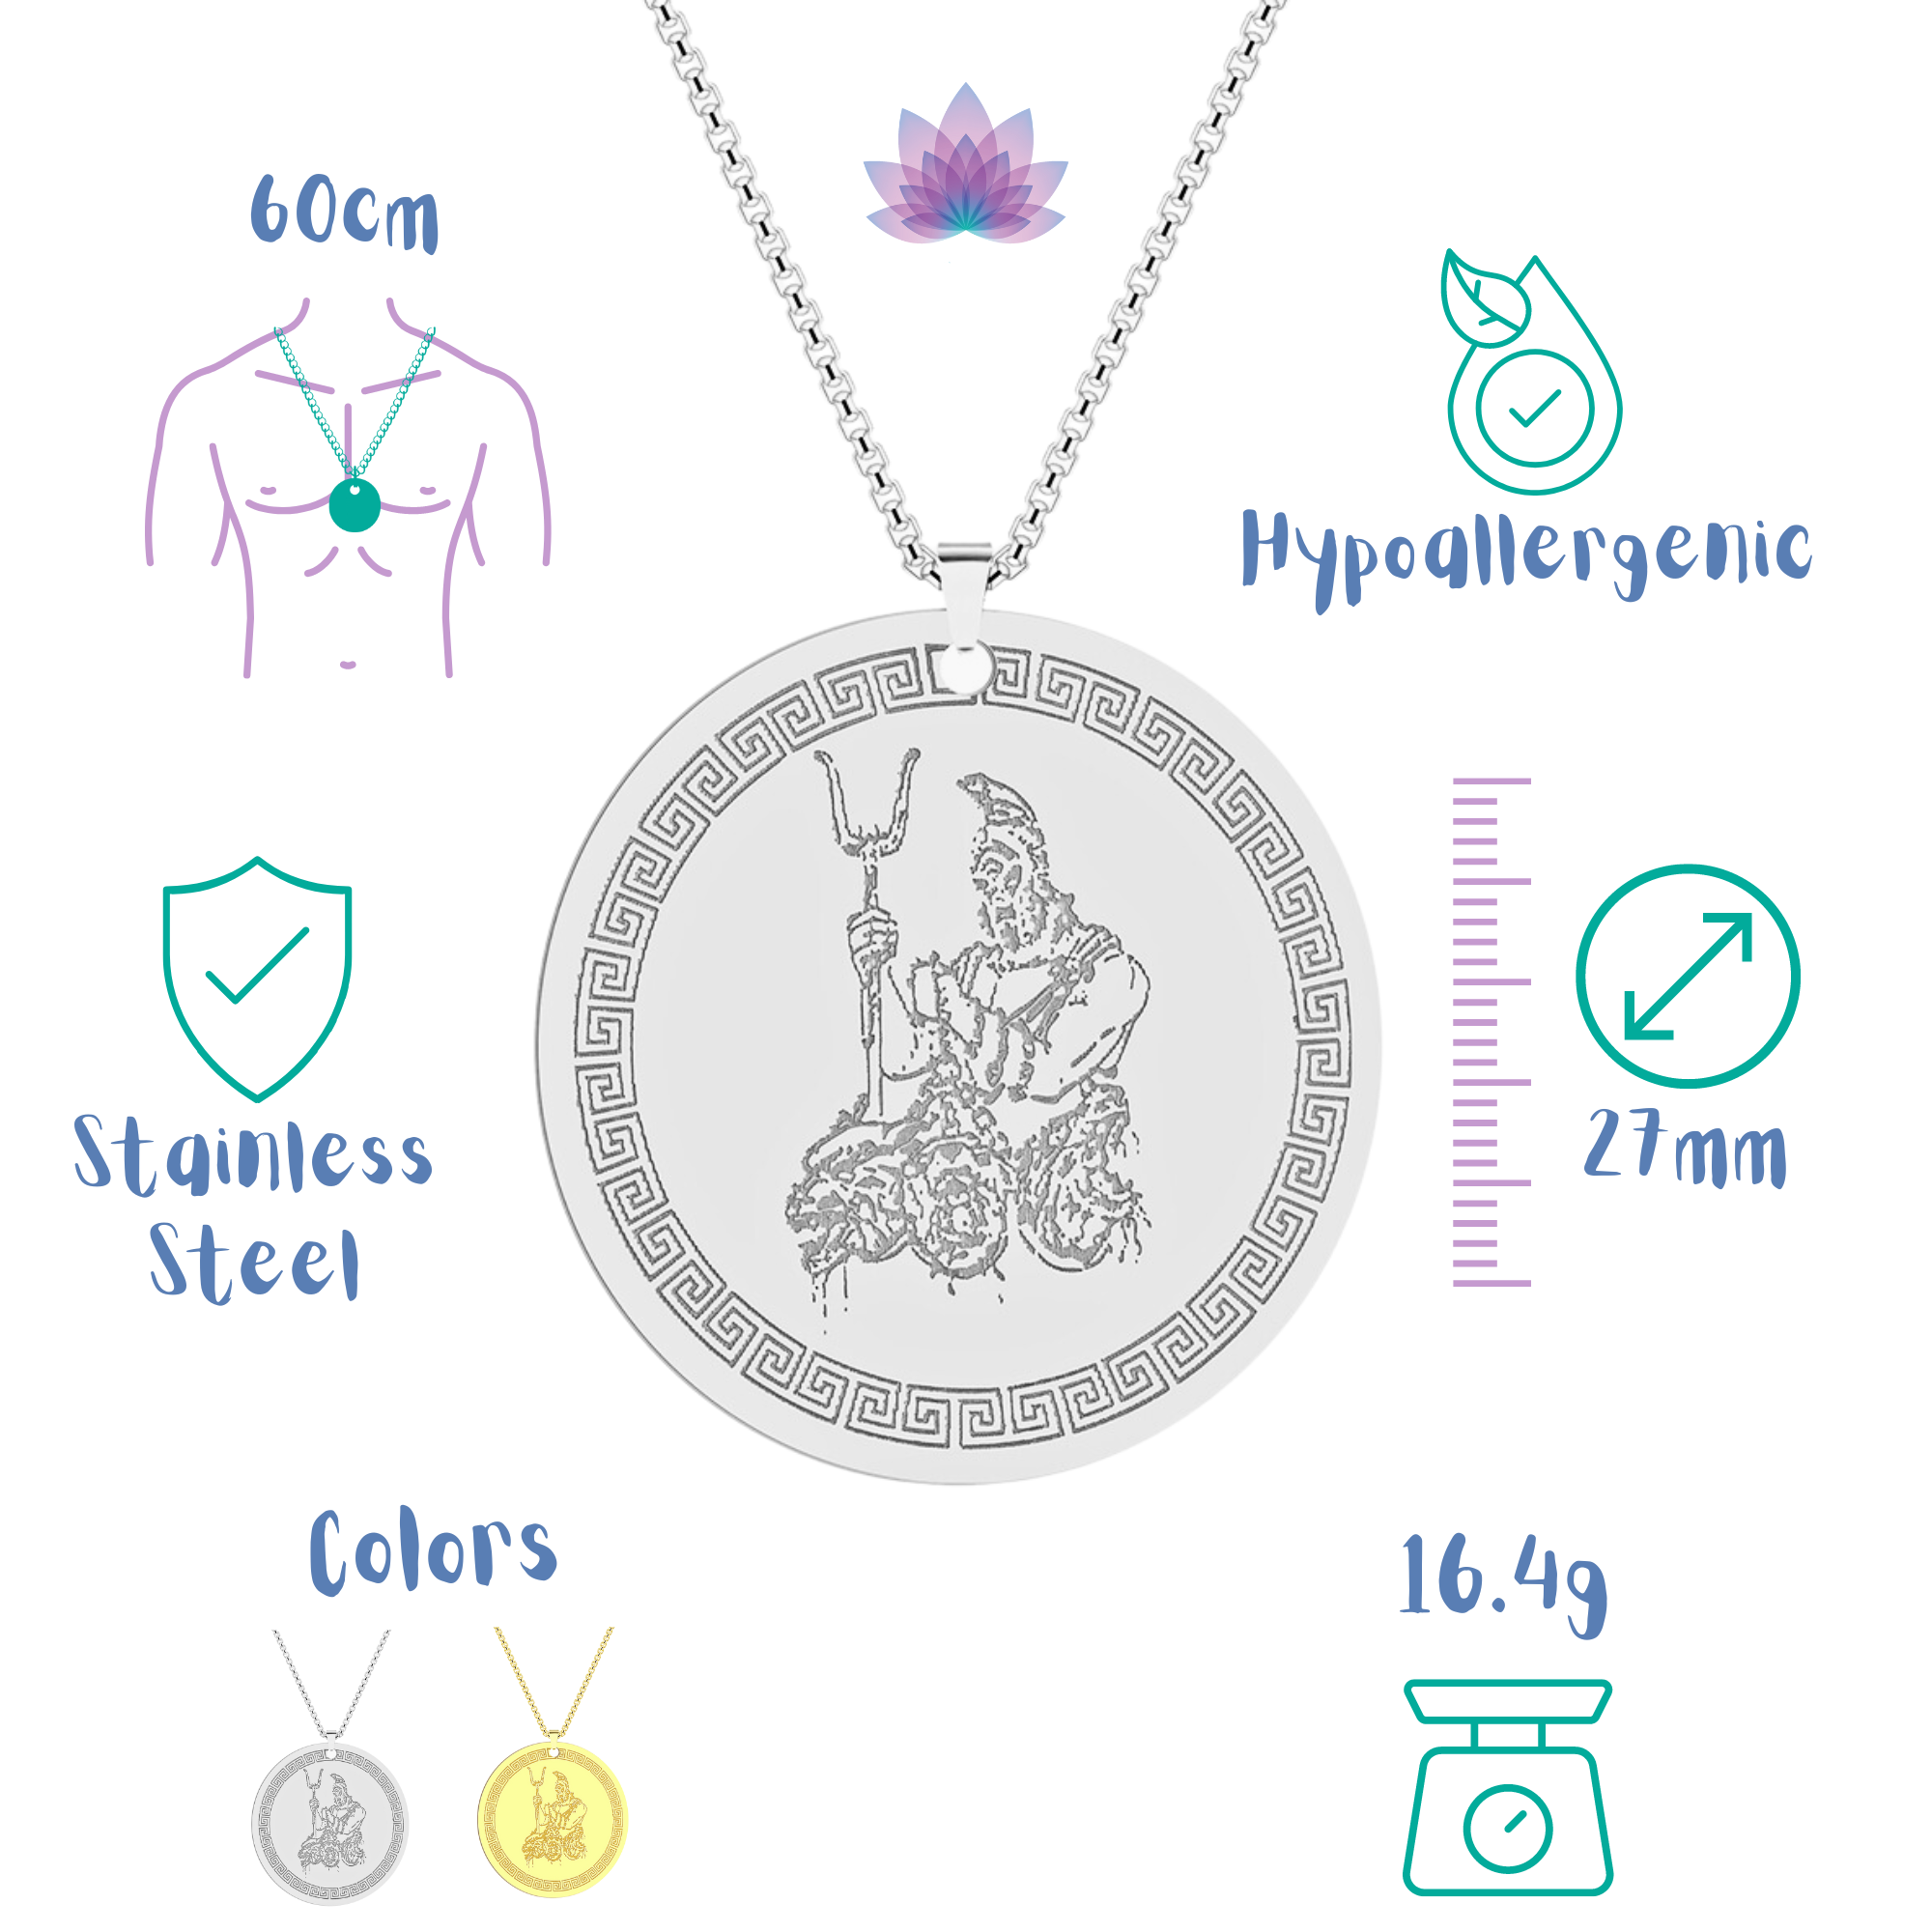 Hades & Cerberus Greek Mythology Necklace | Chthonic God Of The Underworld Pendant | Silver Or Gold-Plated Stainless Steel Charm Jewelry | Apollo Tarot Shop